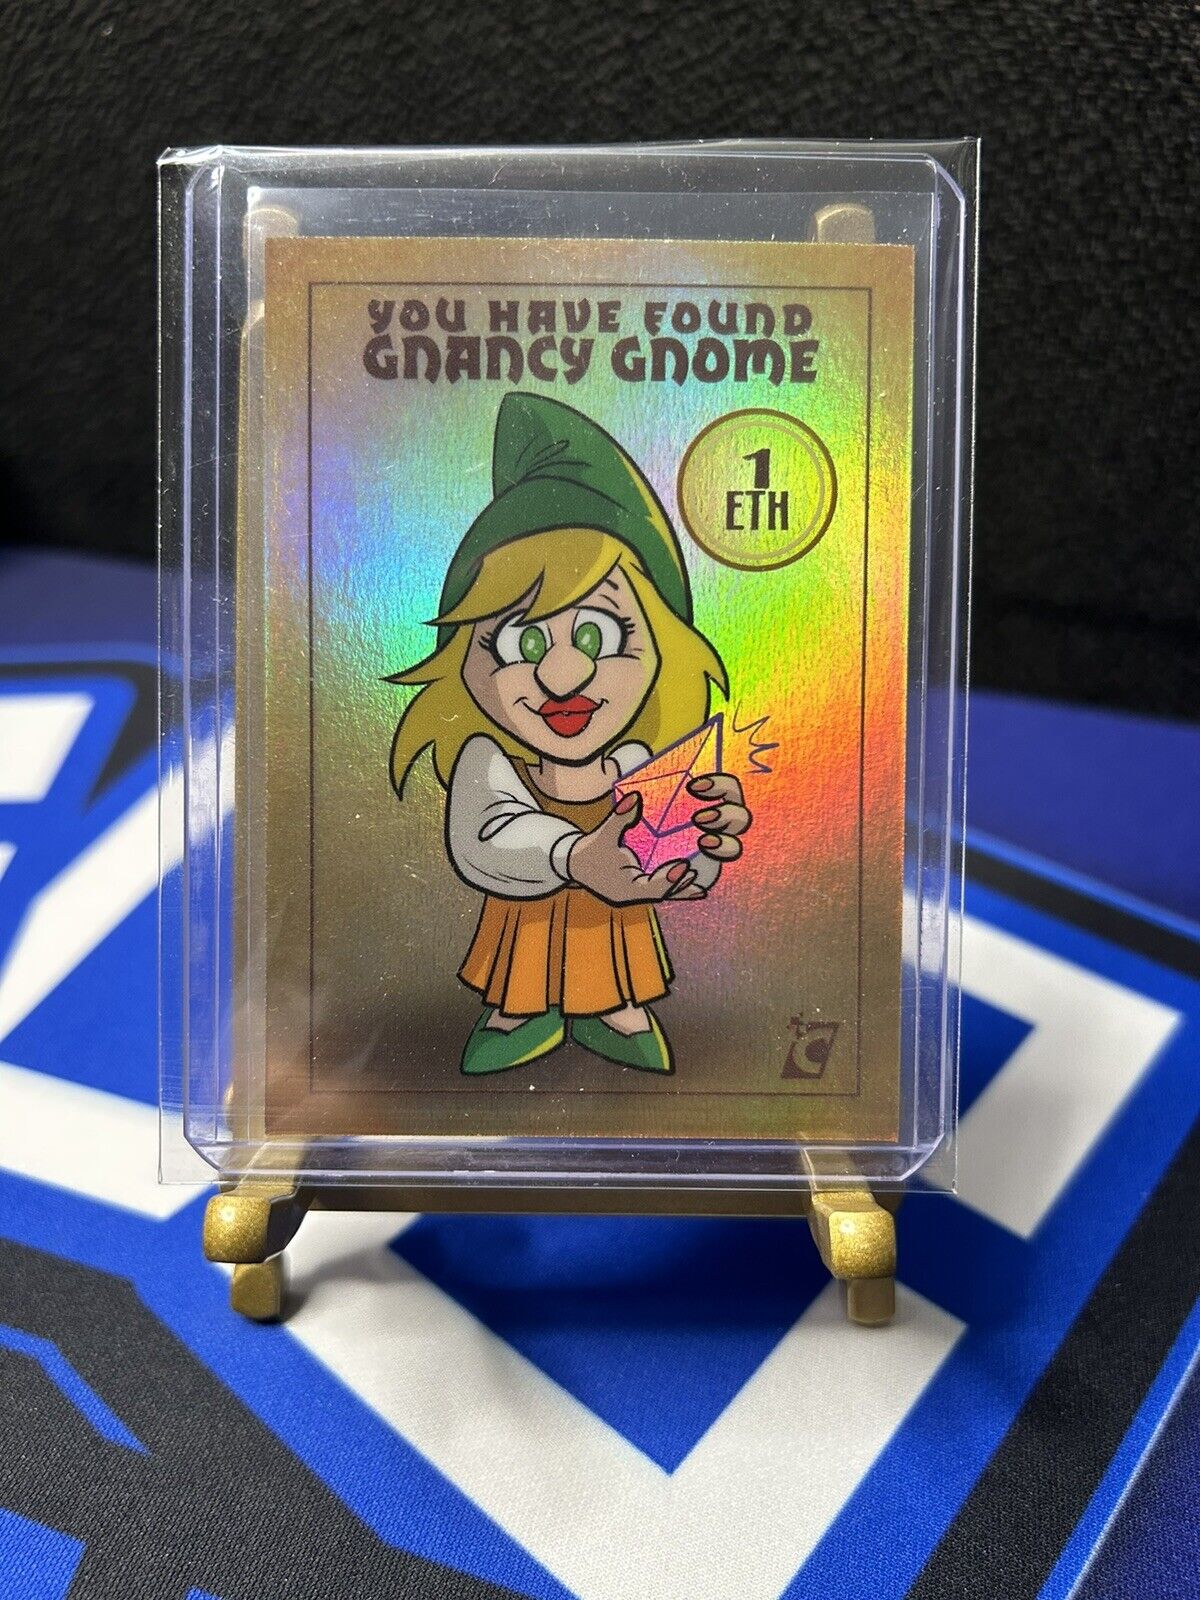 2023 Cardsmiths 1 ETH cryptocurrency redemption EXTREMELY HTF Gnancy Gnome